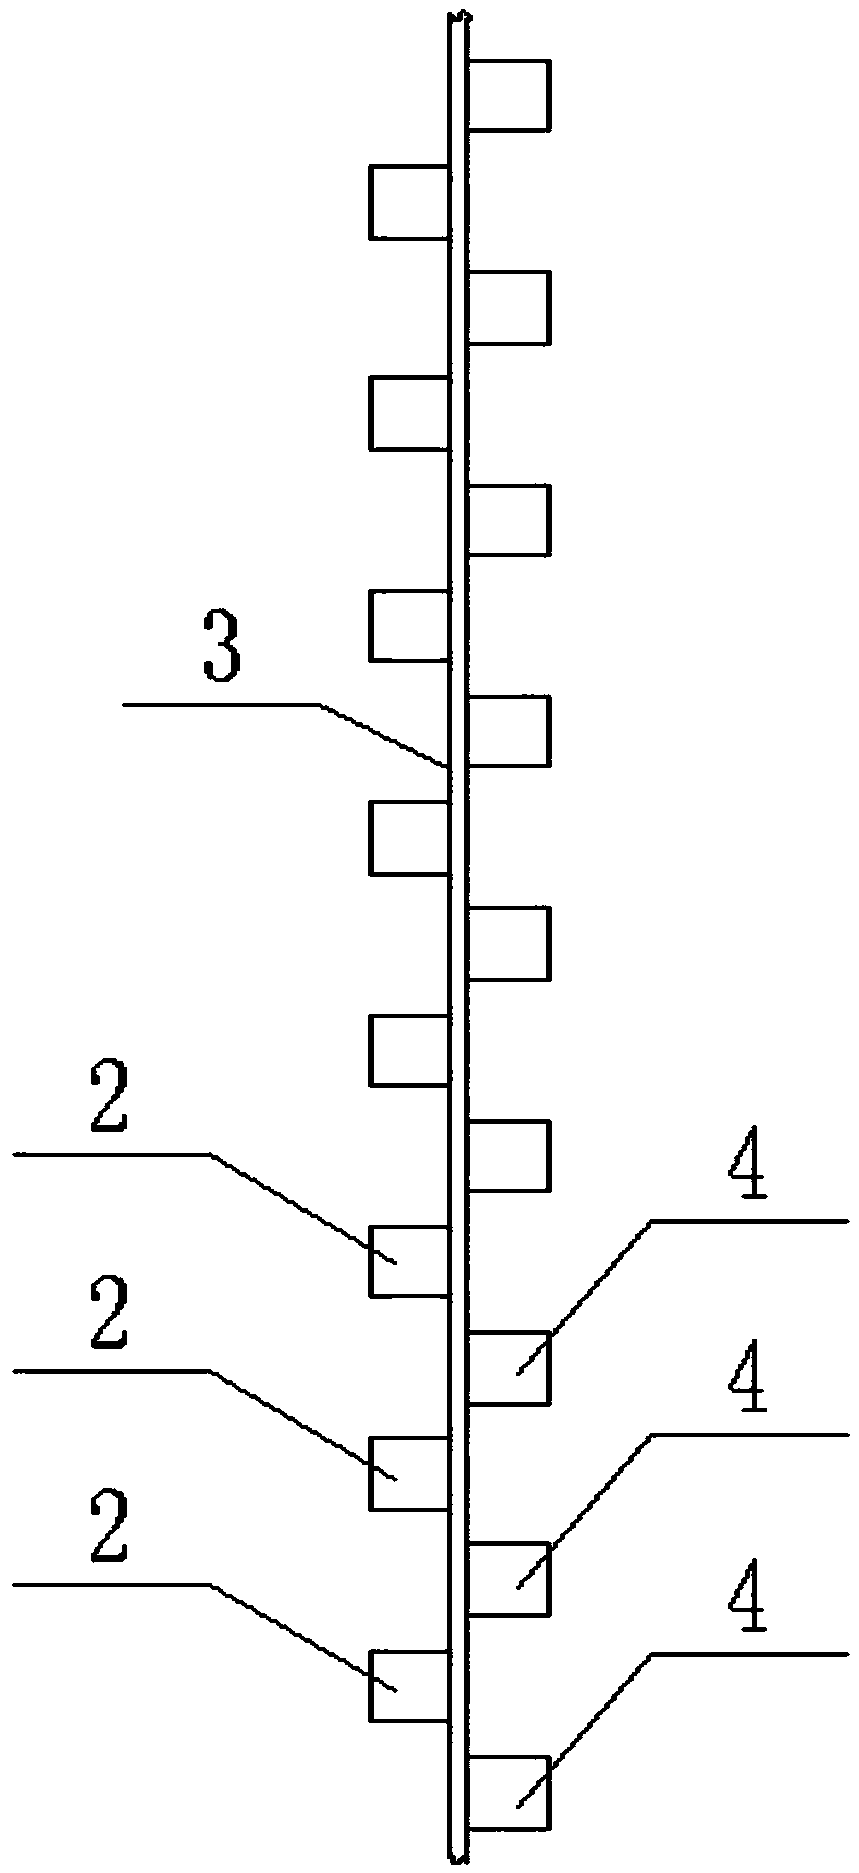 Treatment method suitable for roadbed slope body collapse